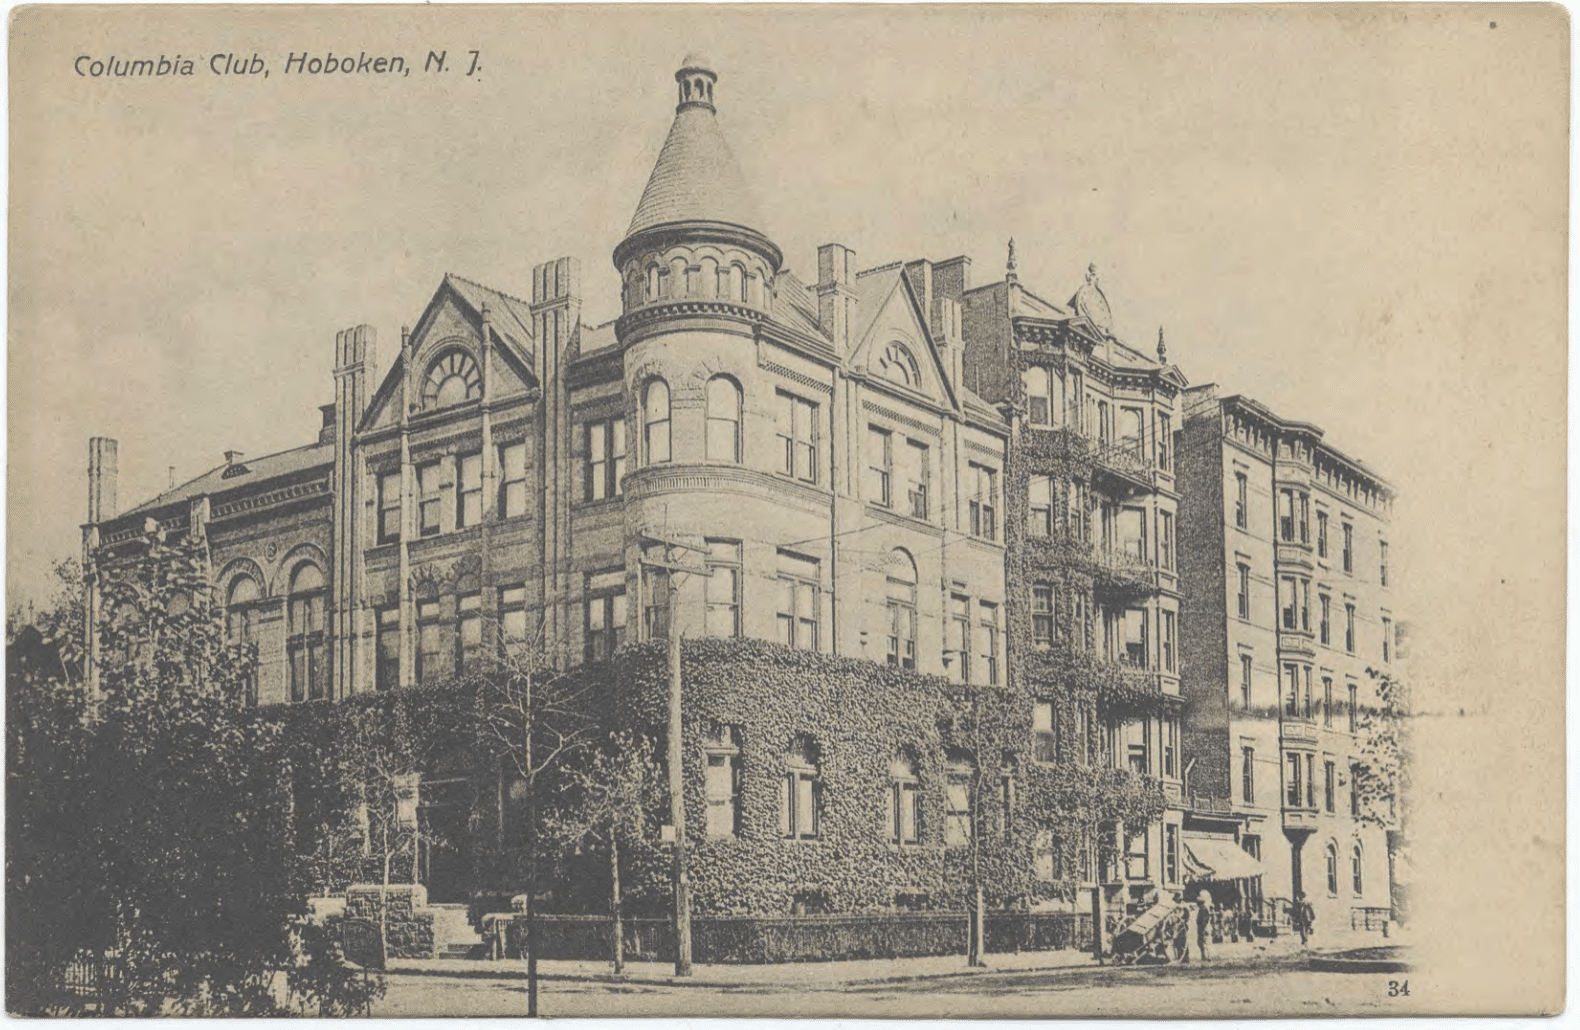 Columbia Club Hoboken back in the day